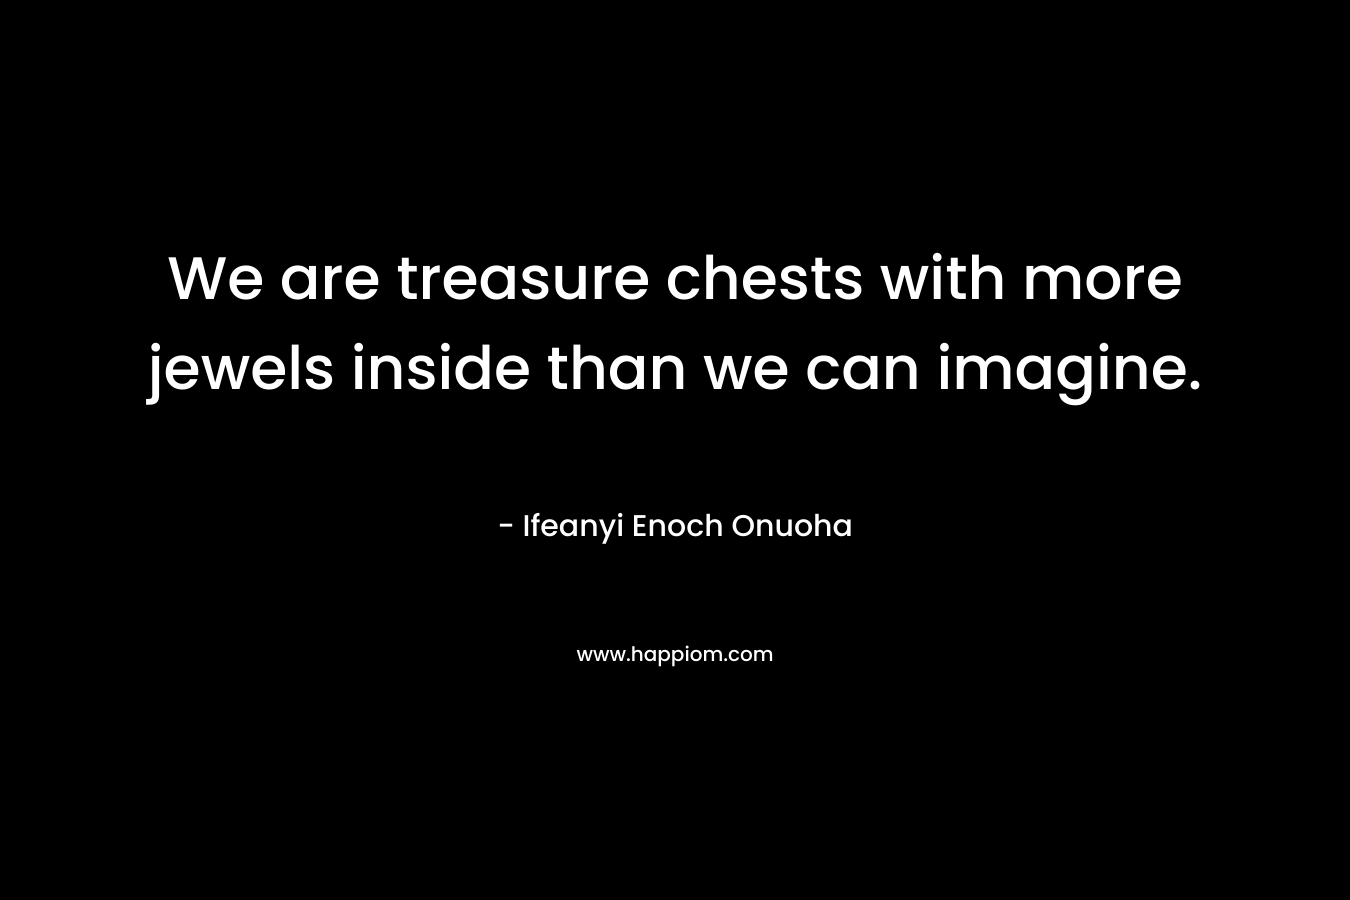 We are treasure chests with more jewels inside than we can imagine. – Ifeanyi Enoch Onuoha